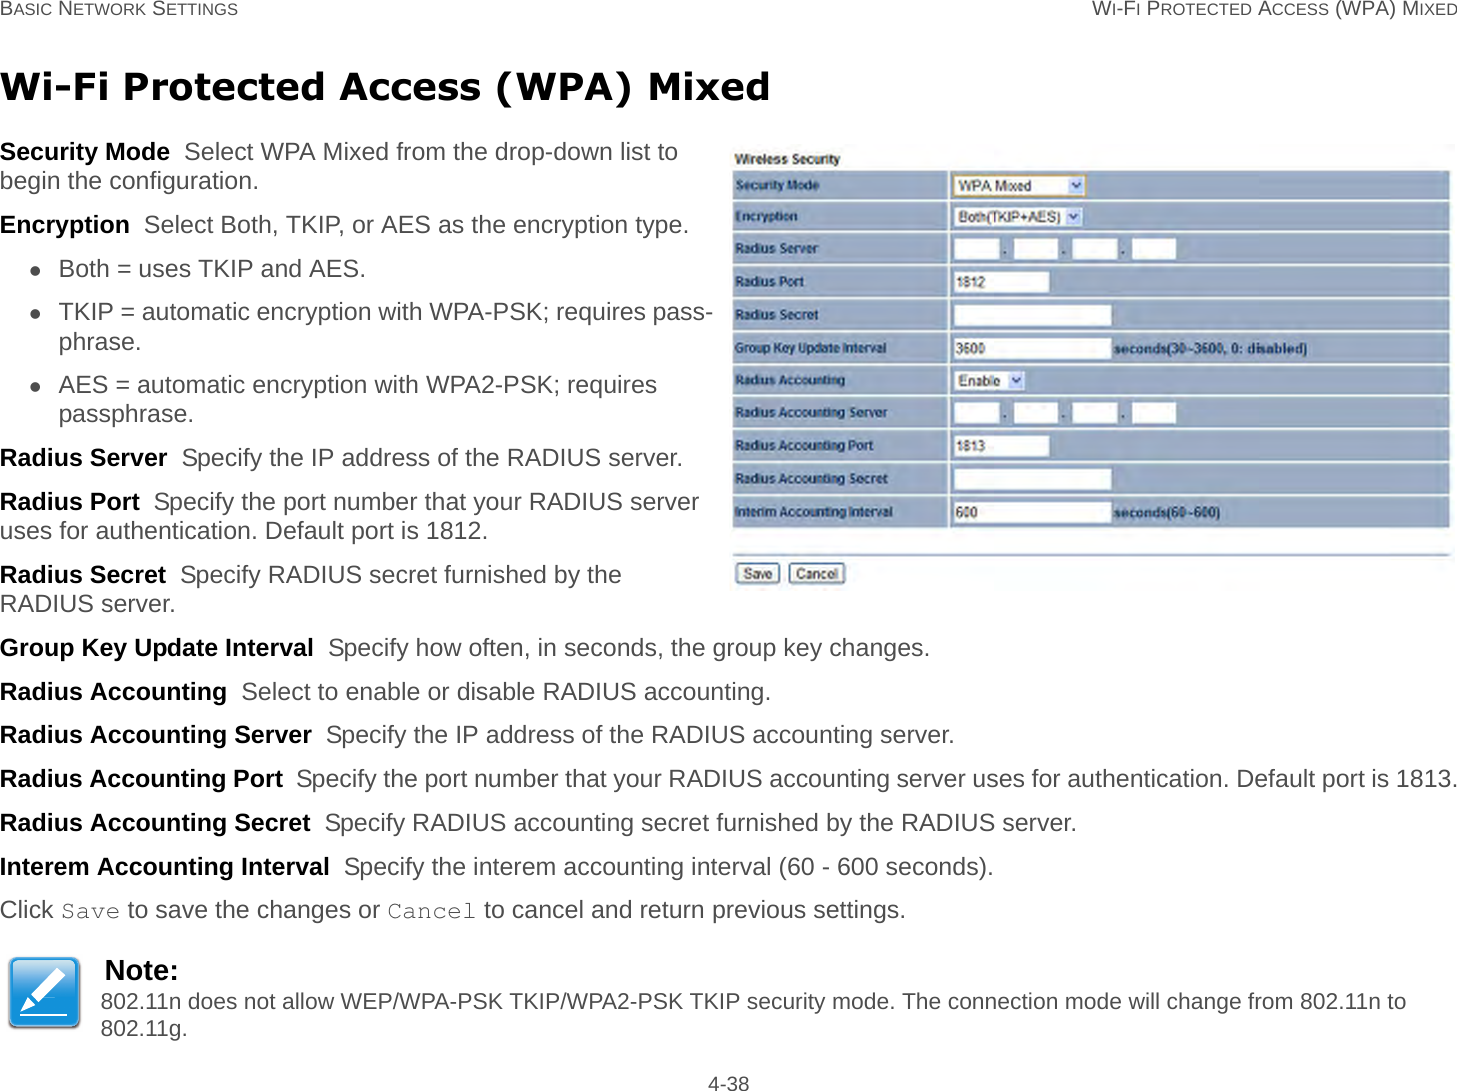 BASIC NETWORK SETTINGS WI-FI PROTECTED ACCESS (WPA) MIXED 4-38Wi-Fi Protected Access (WPA) MixedSecurity Mode  Select WPA Mixed from the drop-down list to begin the configuration.Encryption  Select Both, TKIP, or AES as the encryption type.Both = uses TKIP and AES.TKIP = automatic encryption with WPA-PSK; requires pass-phrase.AES = automatic encryption with WPA2-PSK; requires passphrase.Radius Server  Specify the IP address of the RADIUS server.Radius Port  Specify the port number that your RADIUS server uses for authentication. Default port is 1812.Radius Secret  Specify RADIUS secret furnished by the RADIUS server.Group Key Update Interval  Specify how often, in seconds, the group key changes.Radius Accounting  Select to enable or disable RADIUS accounting.Radius Accounting Server  Specify the IP address of the RADIUS accounting server.Radius Accounting Port  Specify the port number that your RADIUS accounting server uses for authentication. Default port is 1813.Radius Accounting Secret  Specify RADIUS accounting secret furnished by the RADIUS server.Interem Accounting Interval  Specify the interem accounting interval (60 - 600 seconds).Click Save to save the changes or Cancel to cancel and return previous settings.Note:802.11n does not allow WEP/WPA-PSK TKIP/WPA2-PSK TKIP security mode. The connection mode will change from 802.11n to 802.11g.